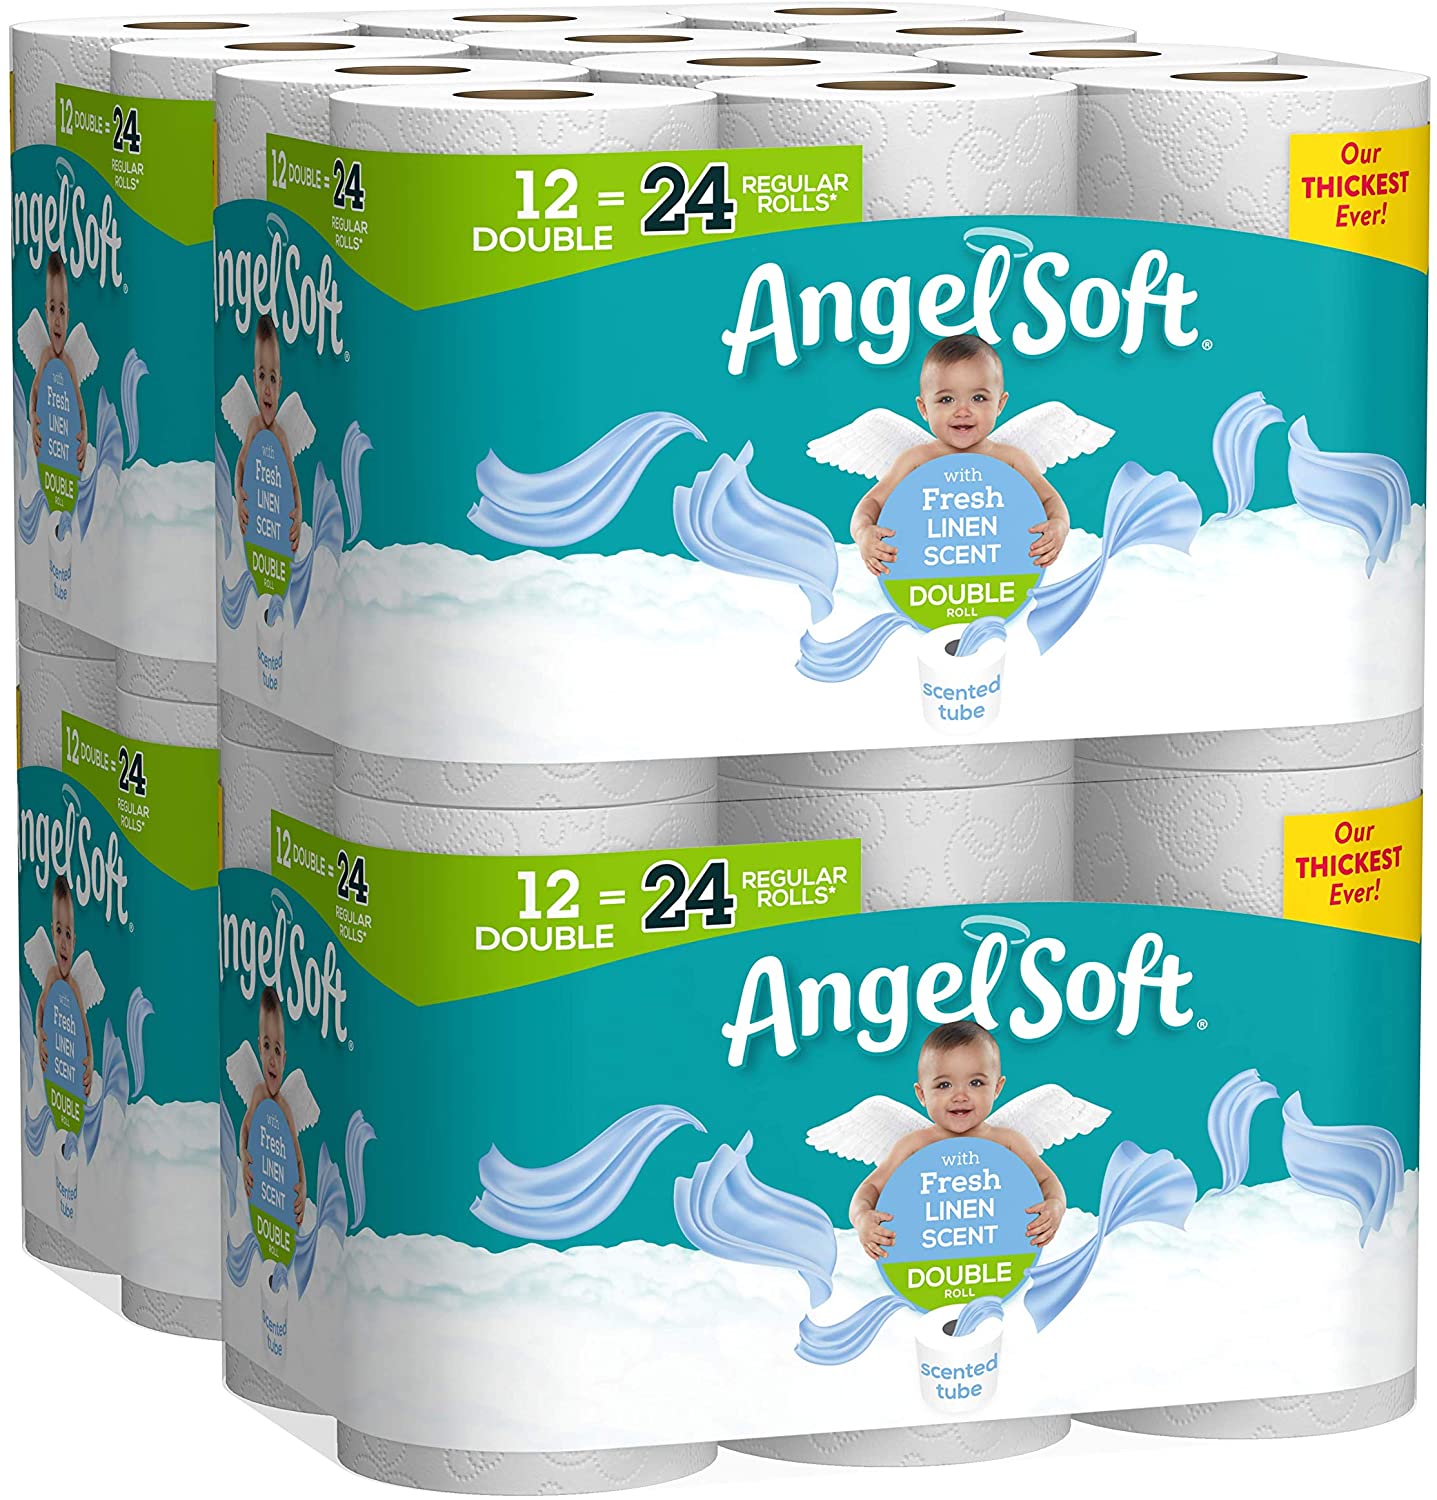 Angel Soft Toilet Paper, Linen Scent, Double Rolls, Bath Tissue, 12 Count of 214 Sheets Per Roll, Pack of 4, White (79373)  for $23 + free shipping w/ Prime